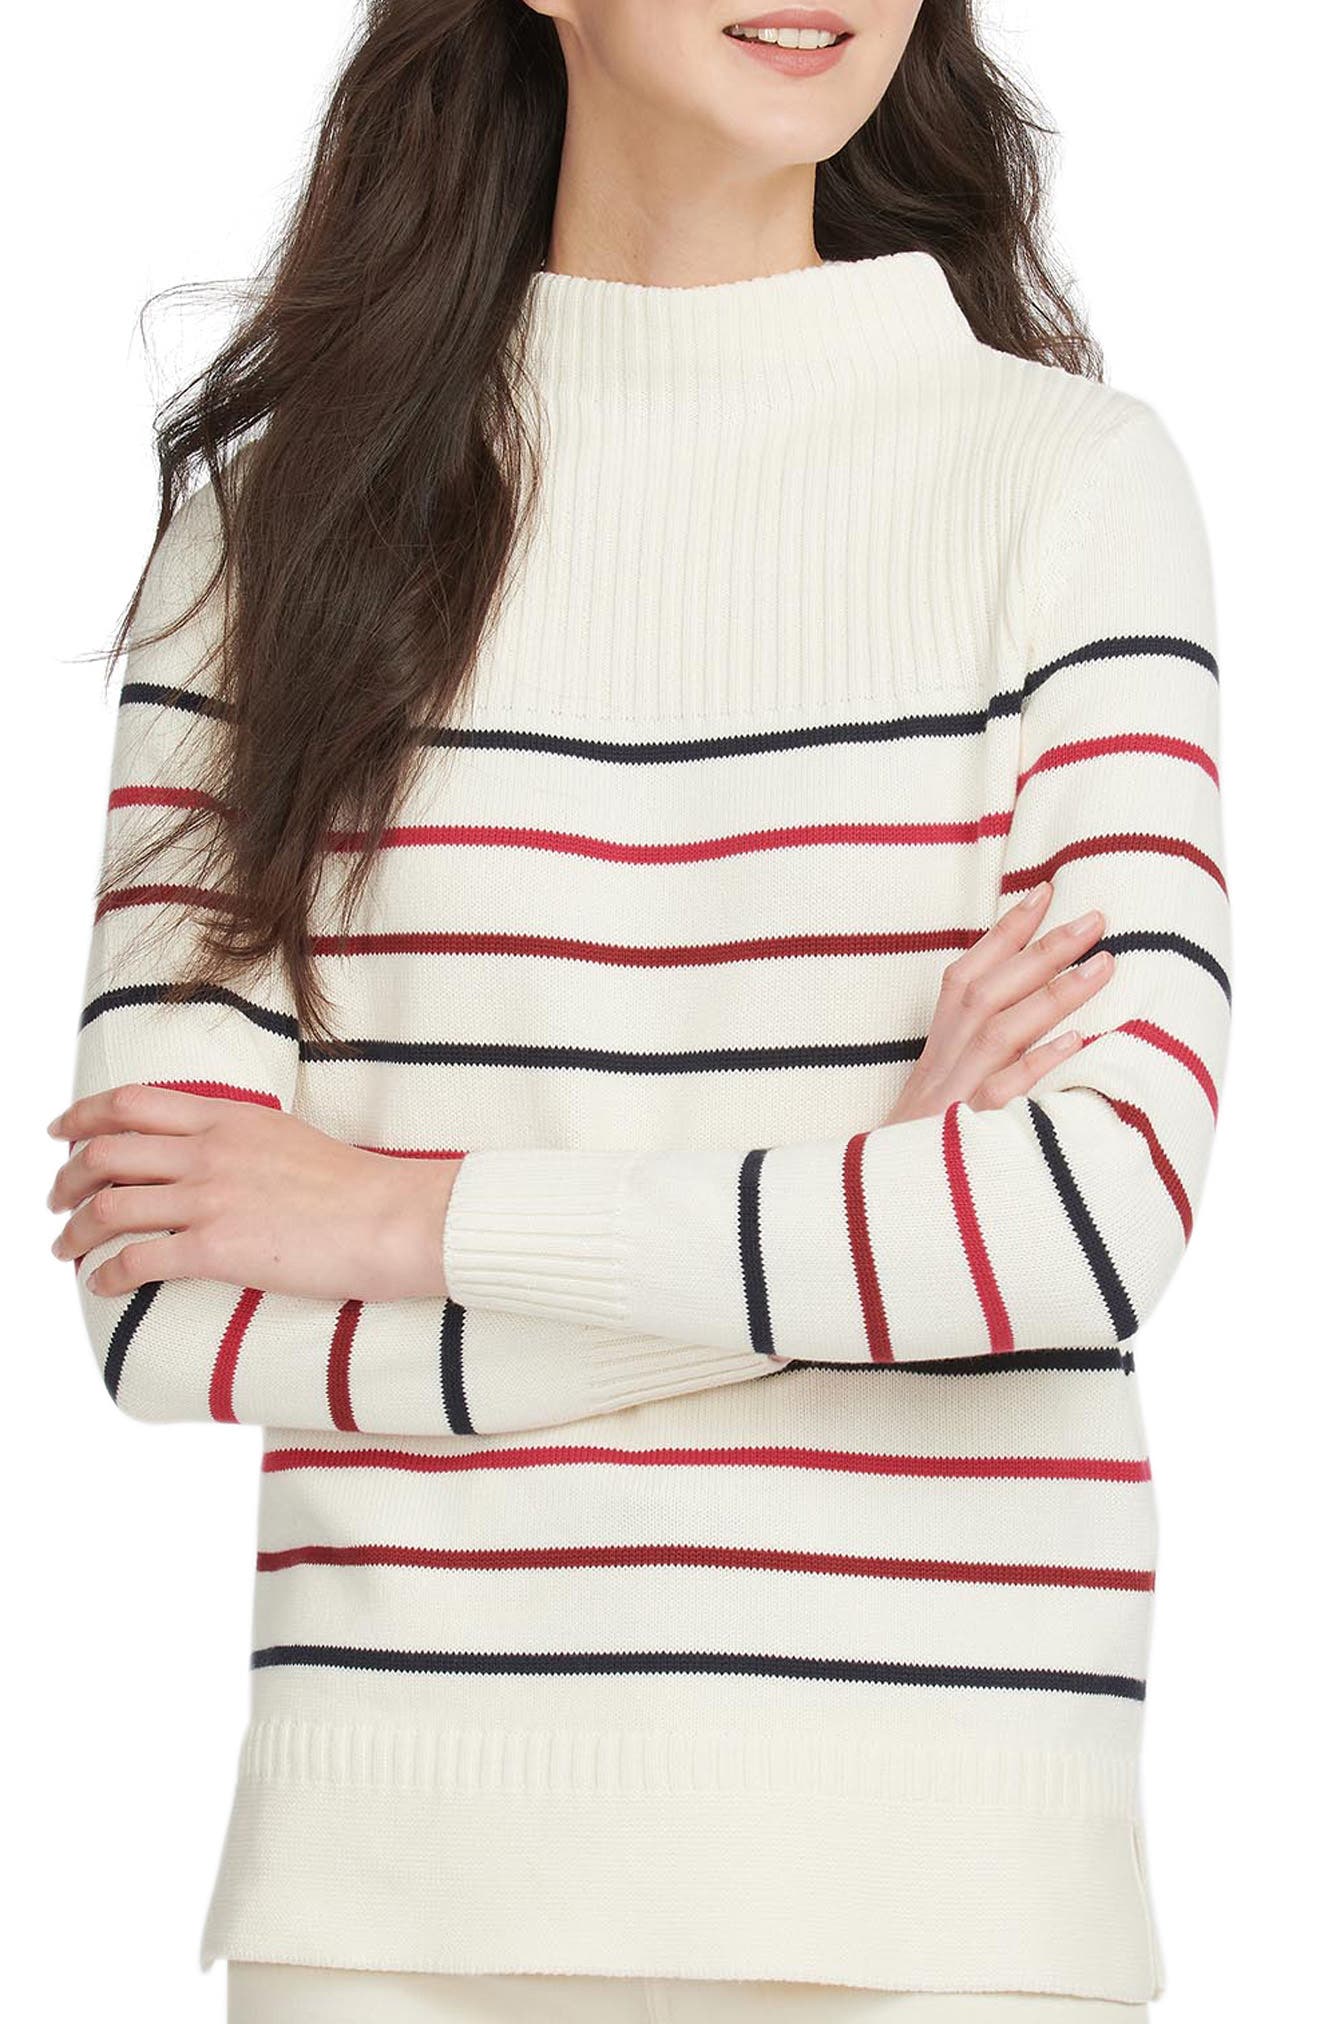 Barbour Guernsey Stripe Funnel Neck Cotton Sweater in Multi Stripe at Nordstrom